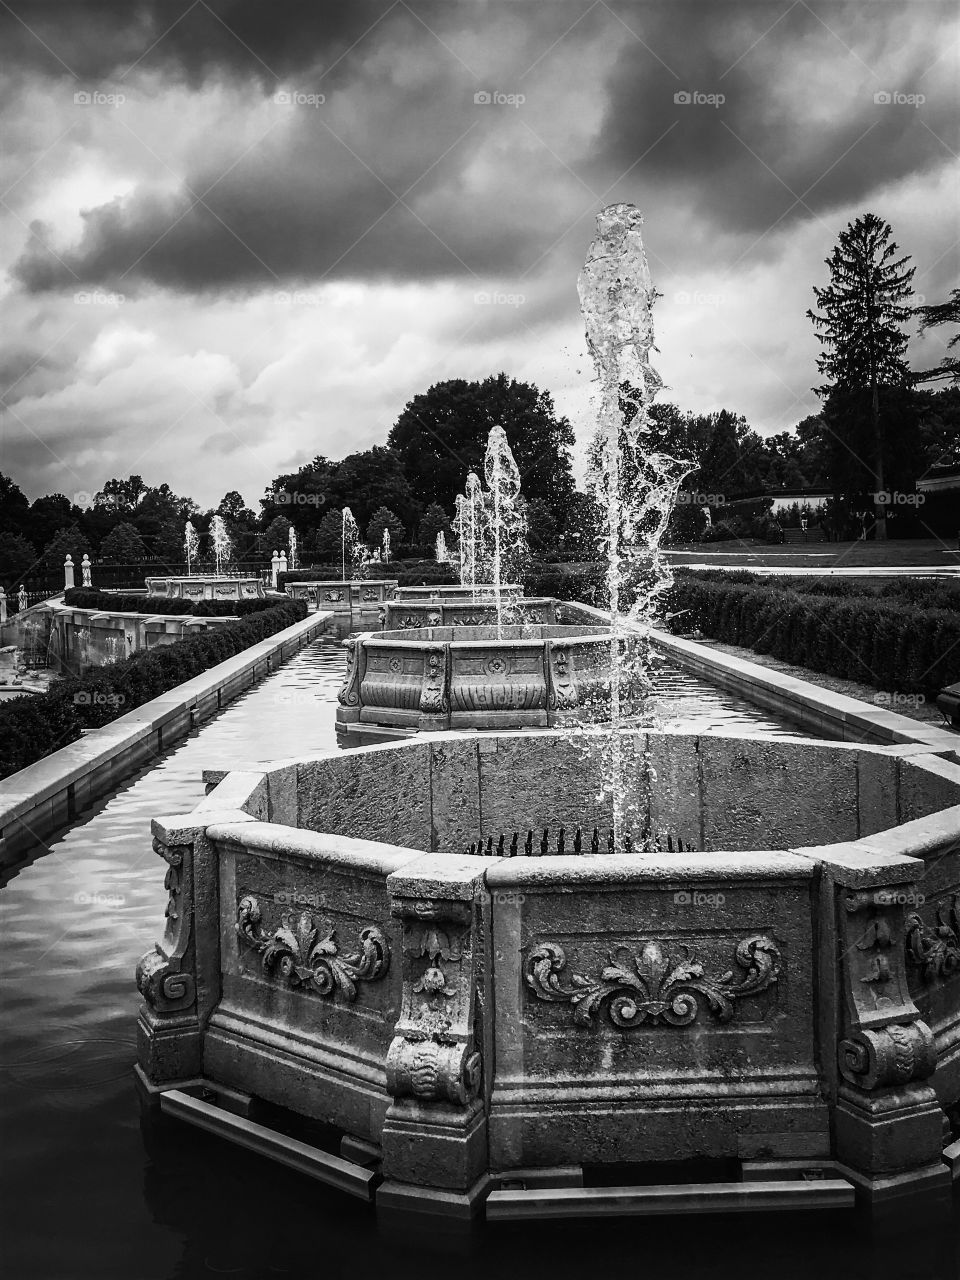 The Fountains at Longwood Gardens 